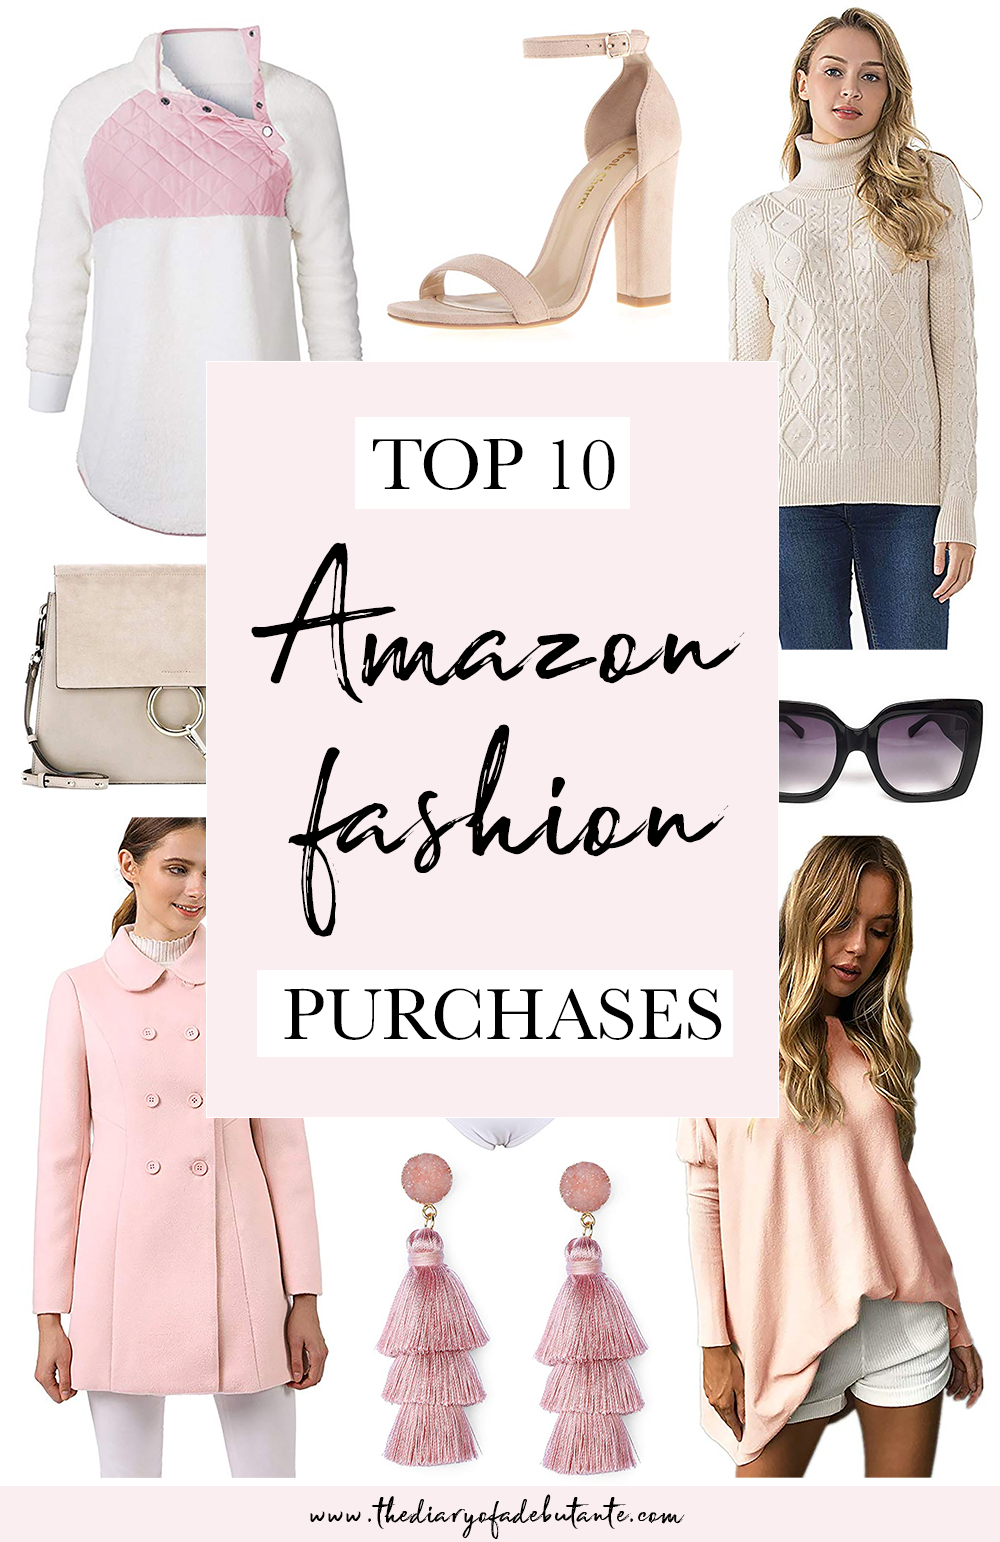 My Top 10 Favorite Amazon Fashion Purchases by Stephanie Ziajka from the popular affordable fashion and southern lifestyle blog Diary of a Debutante, best Amazon Fashion finds, best designer dupes on Amazon, best of Amazon Fashion